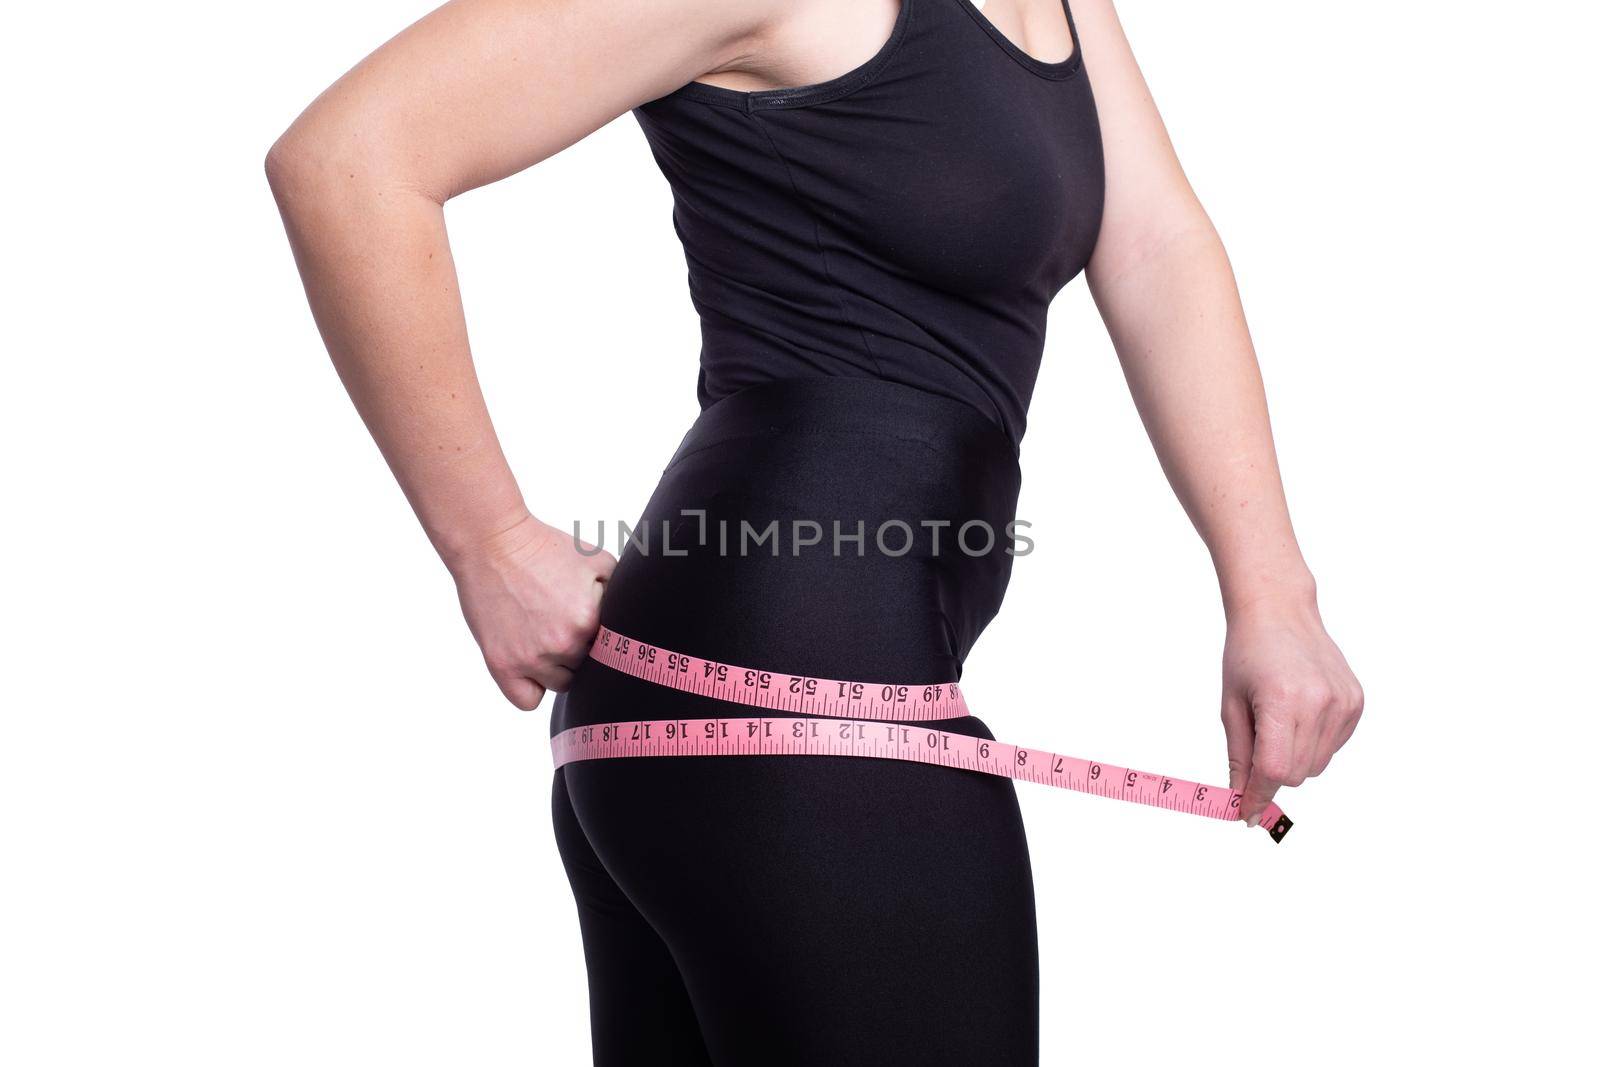 A fat big lady measures the waist measuring tape on a white studio background. happy with the result of the diet and lost a couple of extra pounds. Copy space